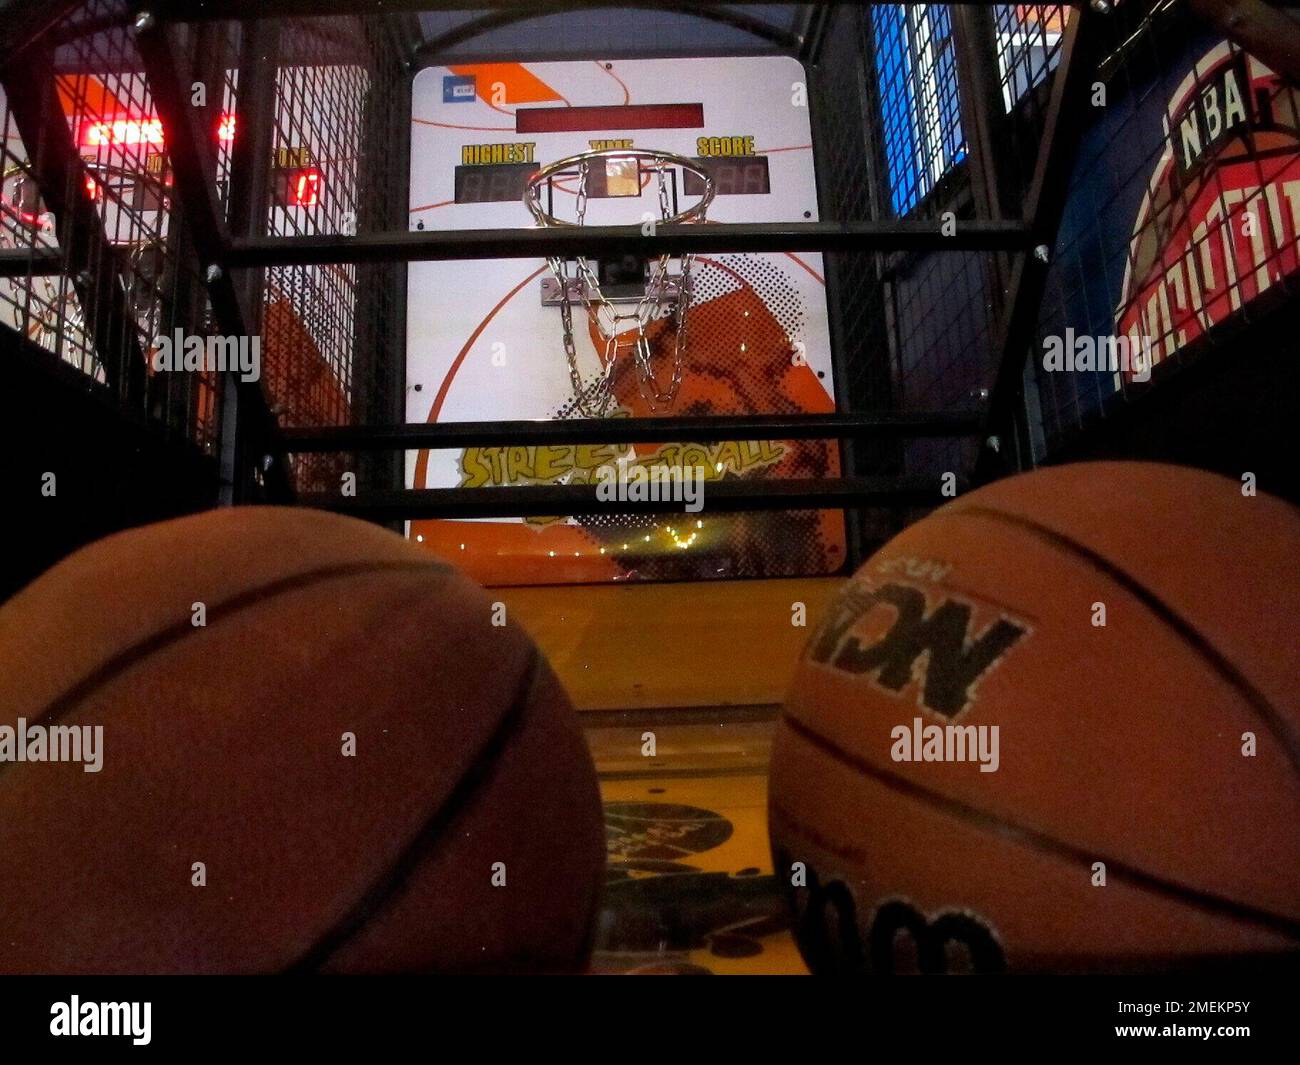 A basketball-shooting game sits inside the soon-to-open Lucky Snake arcade, Wednesday, April 21, 2021, at the former Showboat casino in Atlantic City, N.J